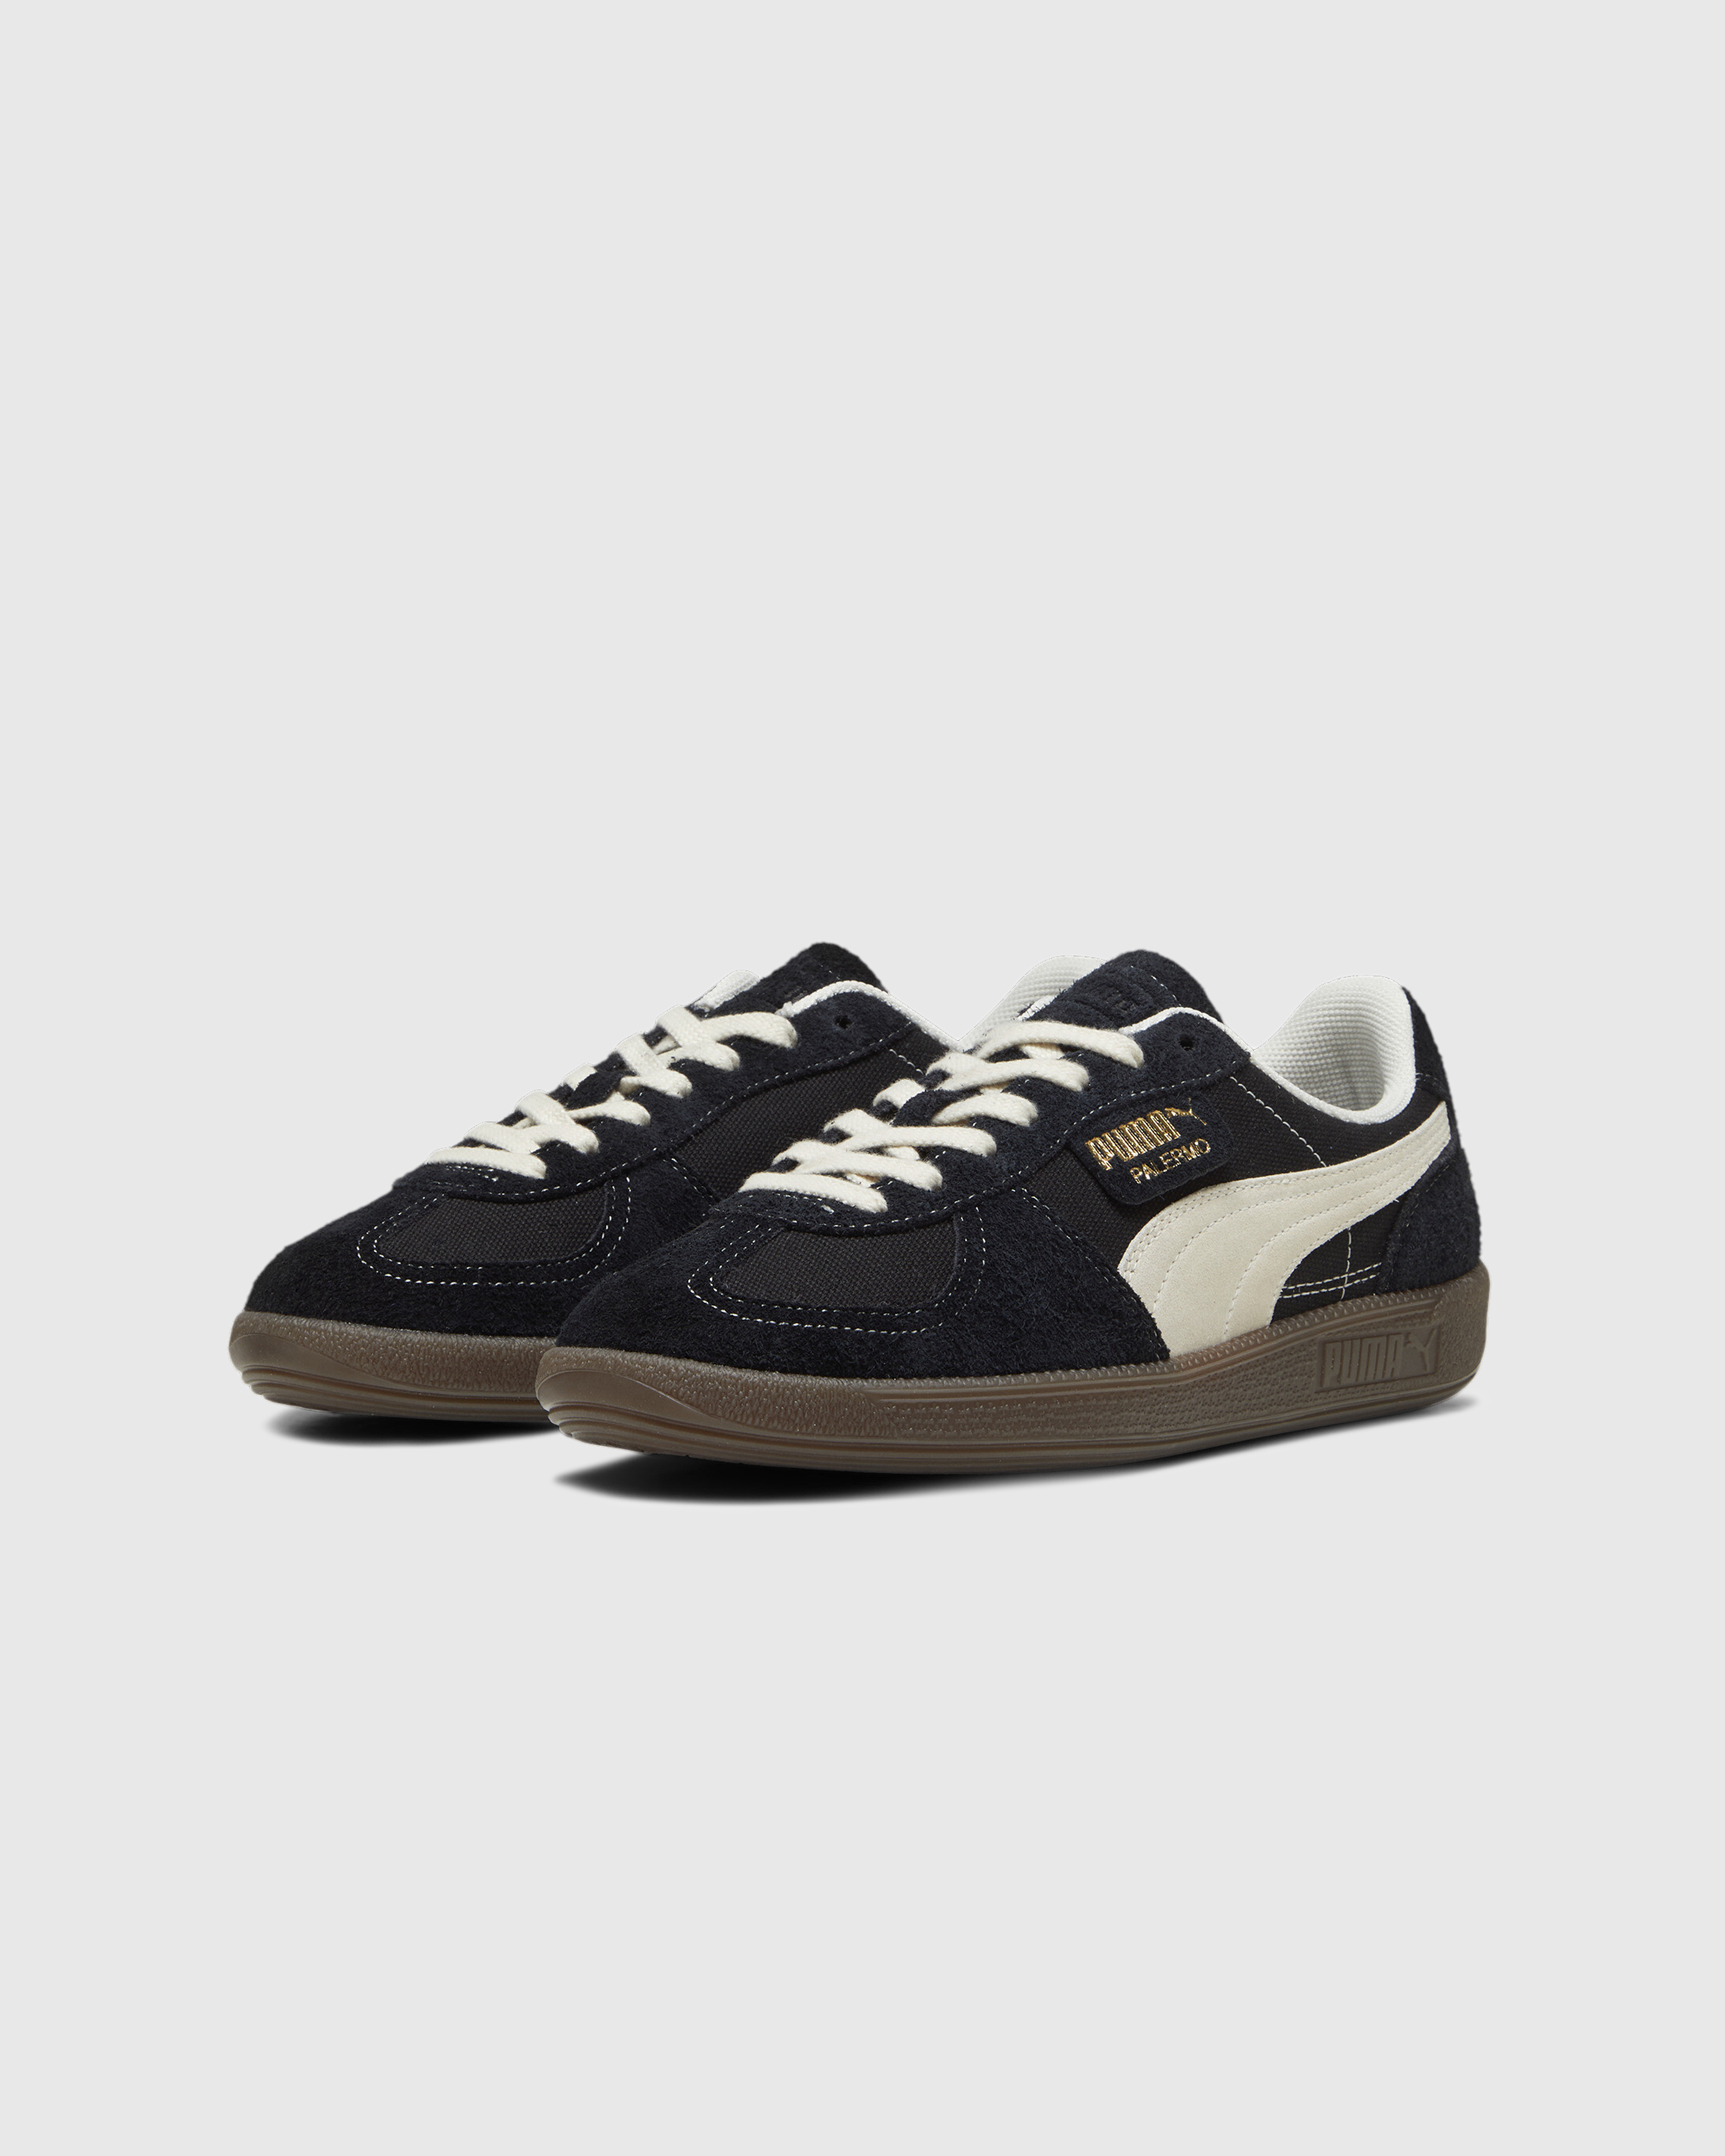 Puma – Palermo Vintage Black/Frosted Ivory/Gum - Low Top Sneakers - Black - Image 5